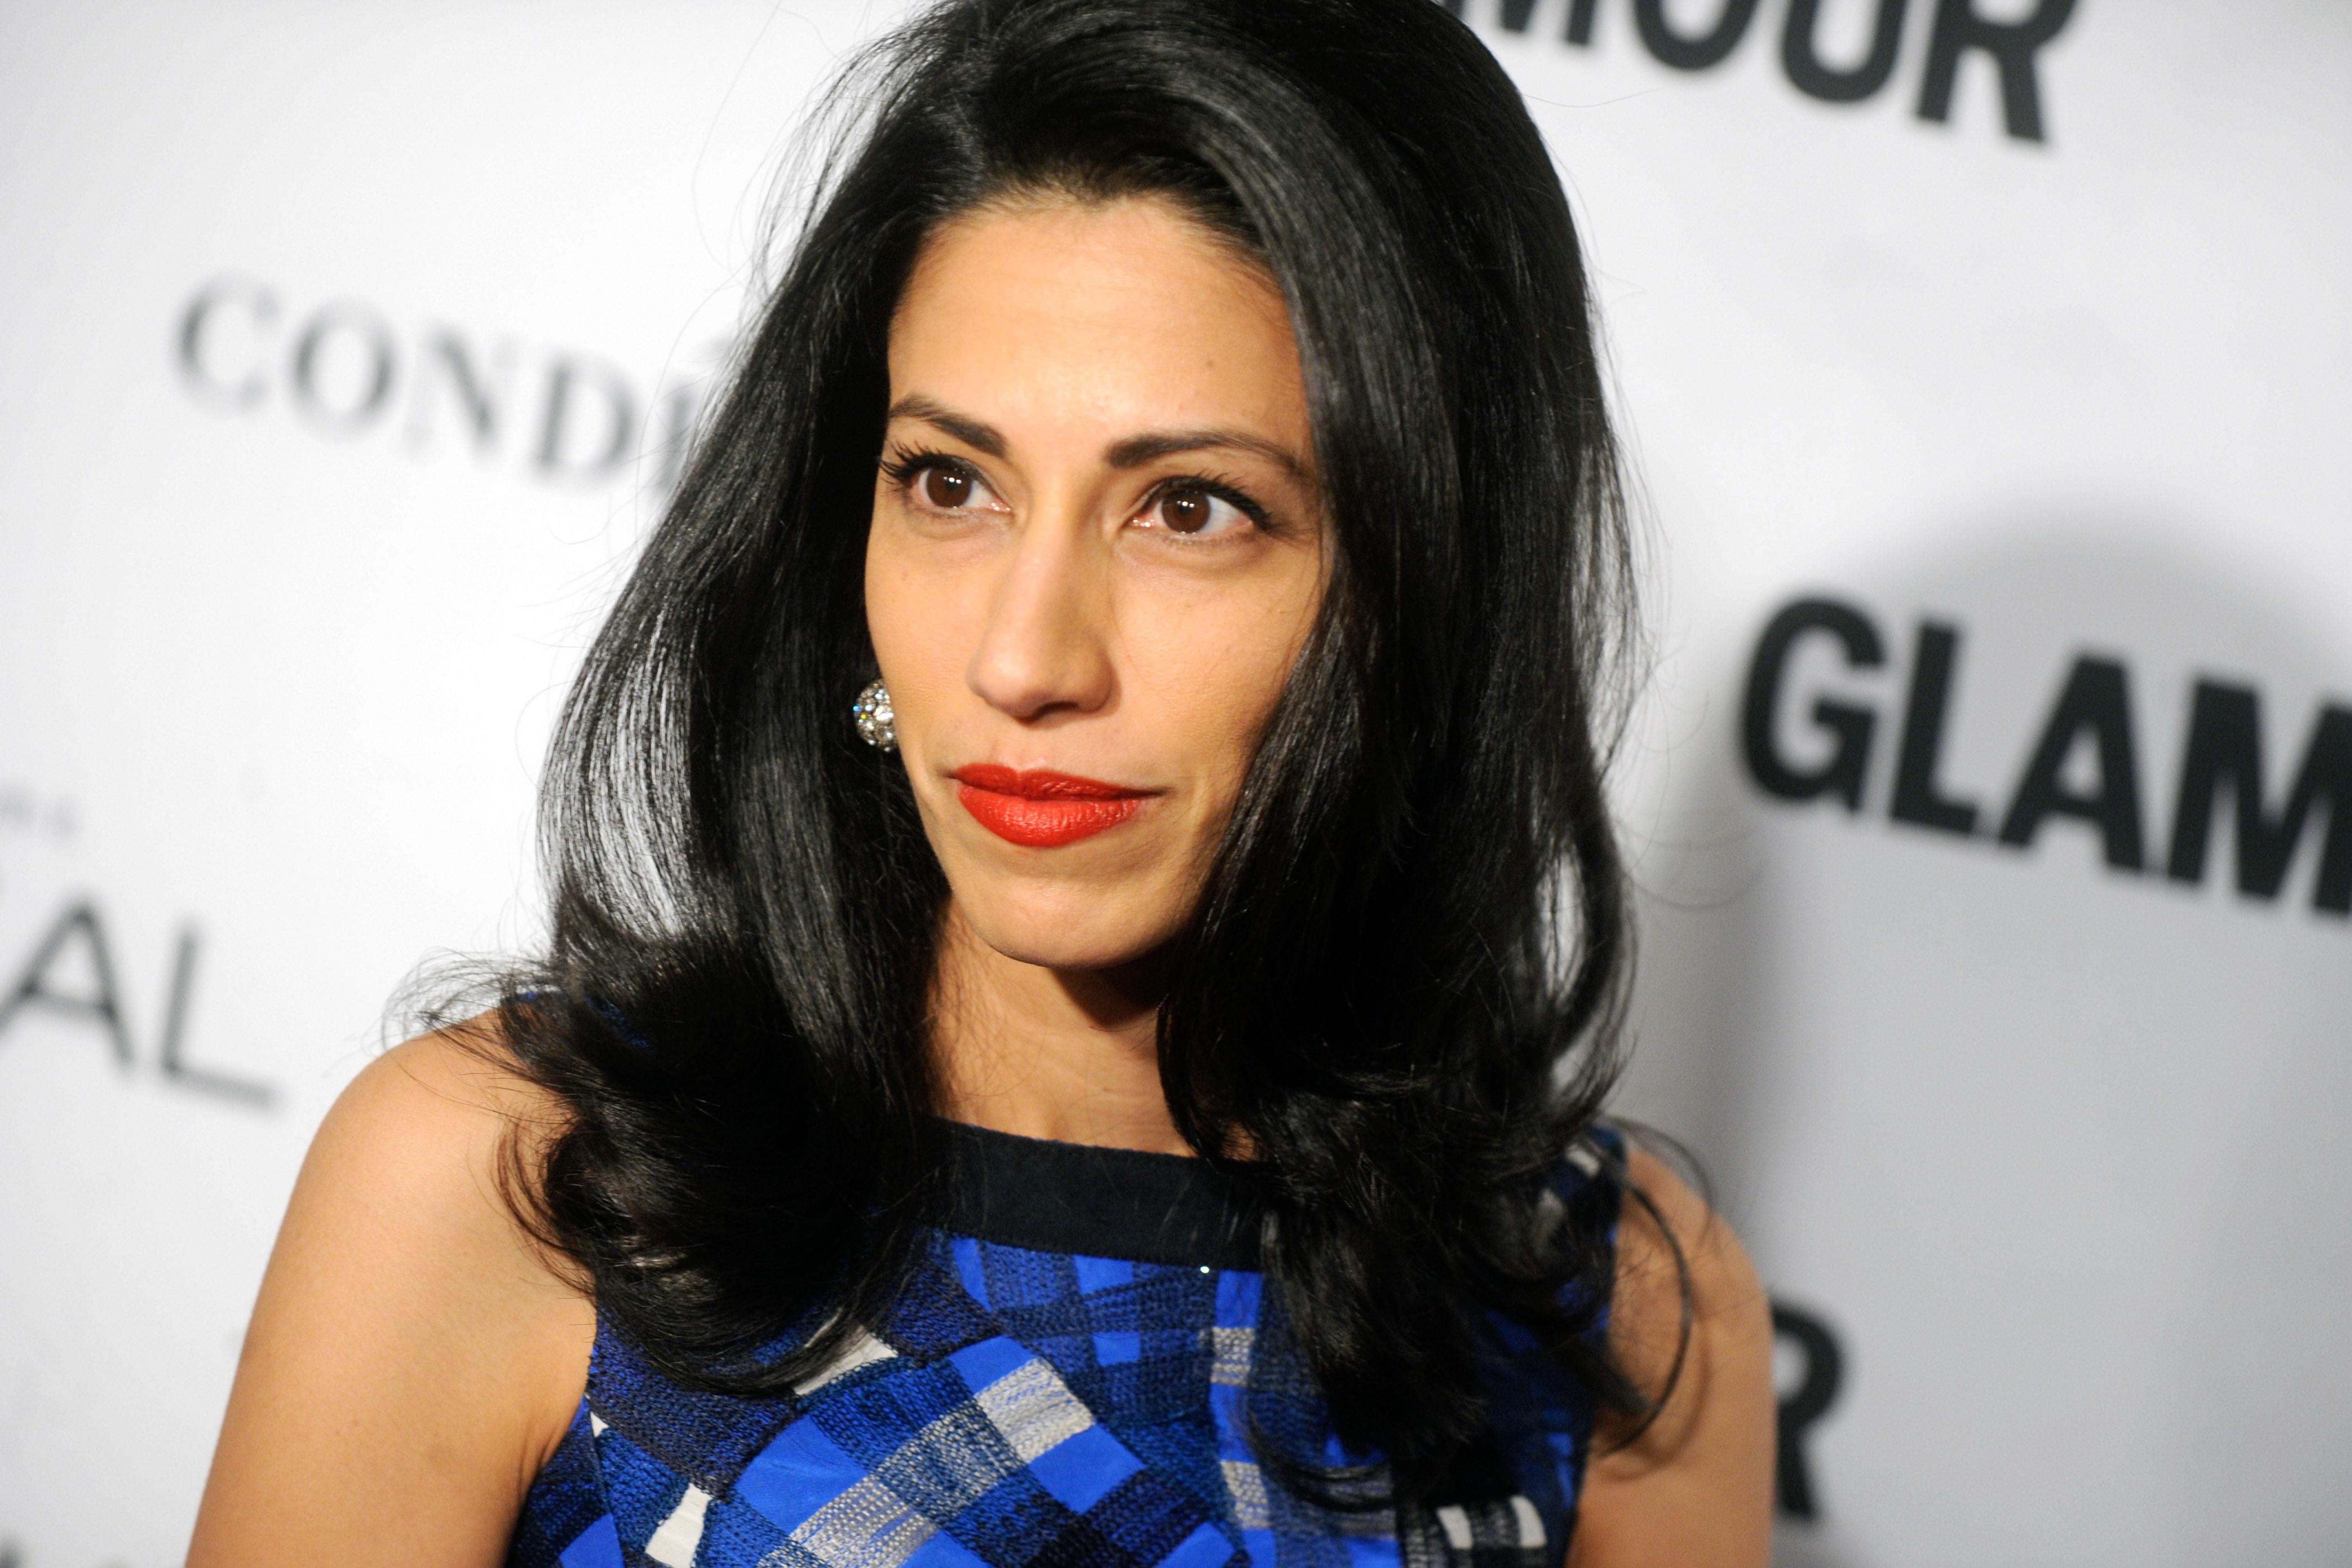 Anthony Weiner Moves Back In With Huma Abedin